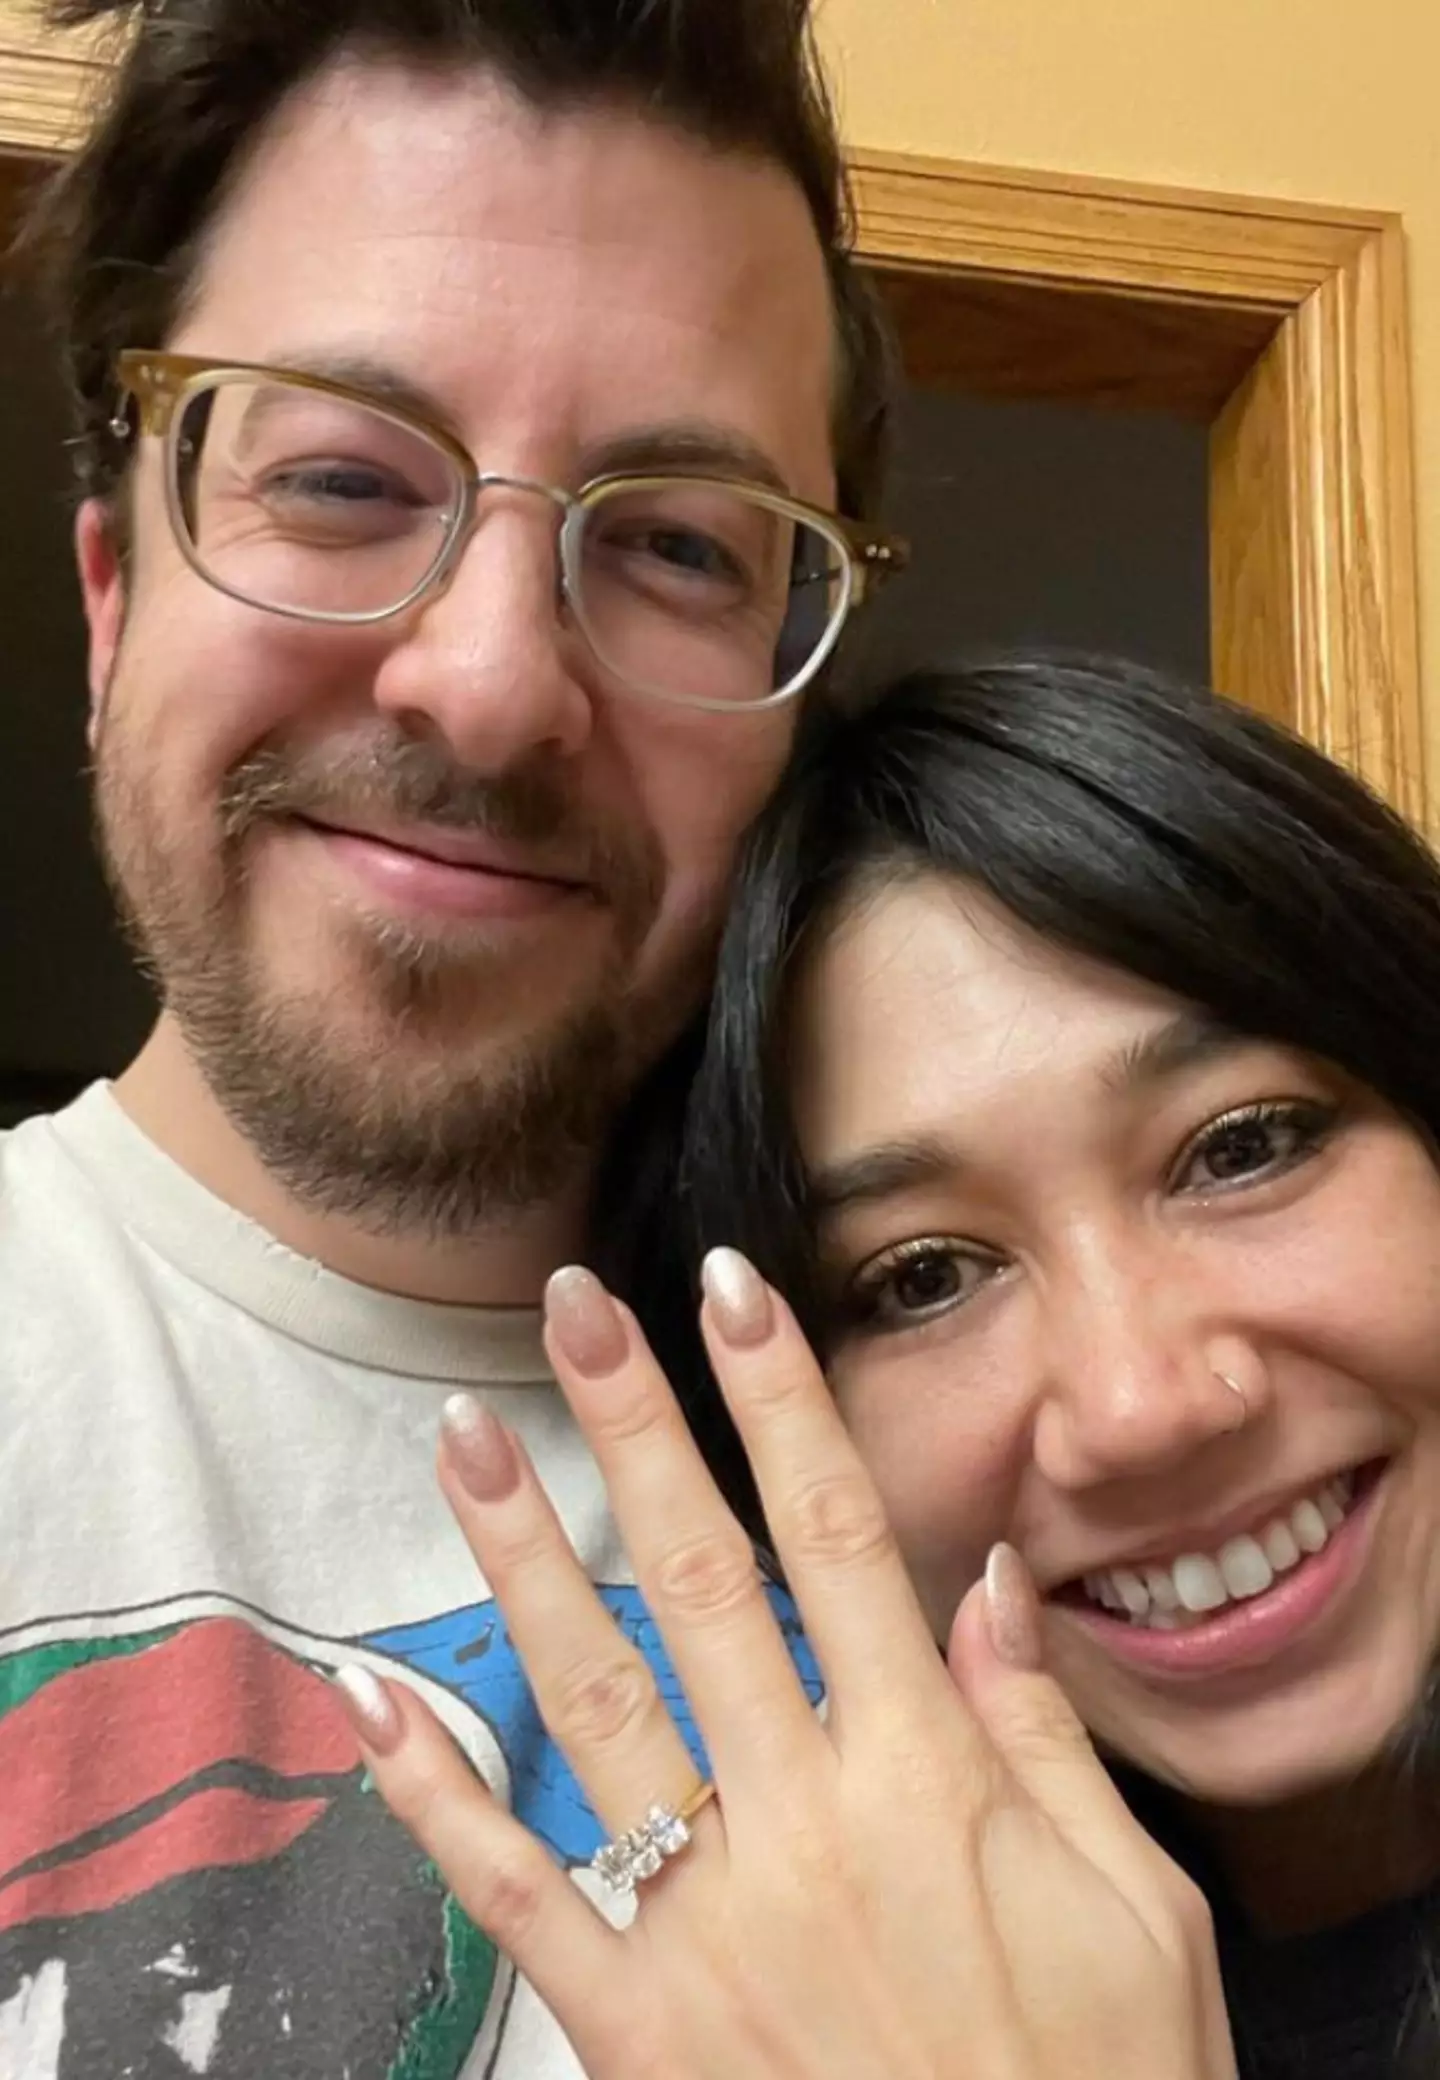 The couple got engaged in December.